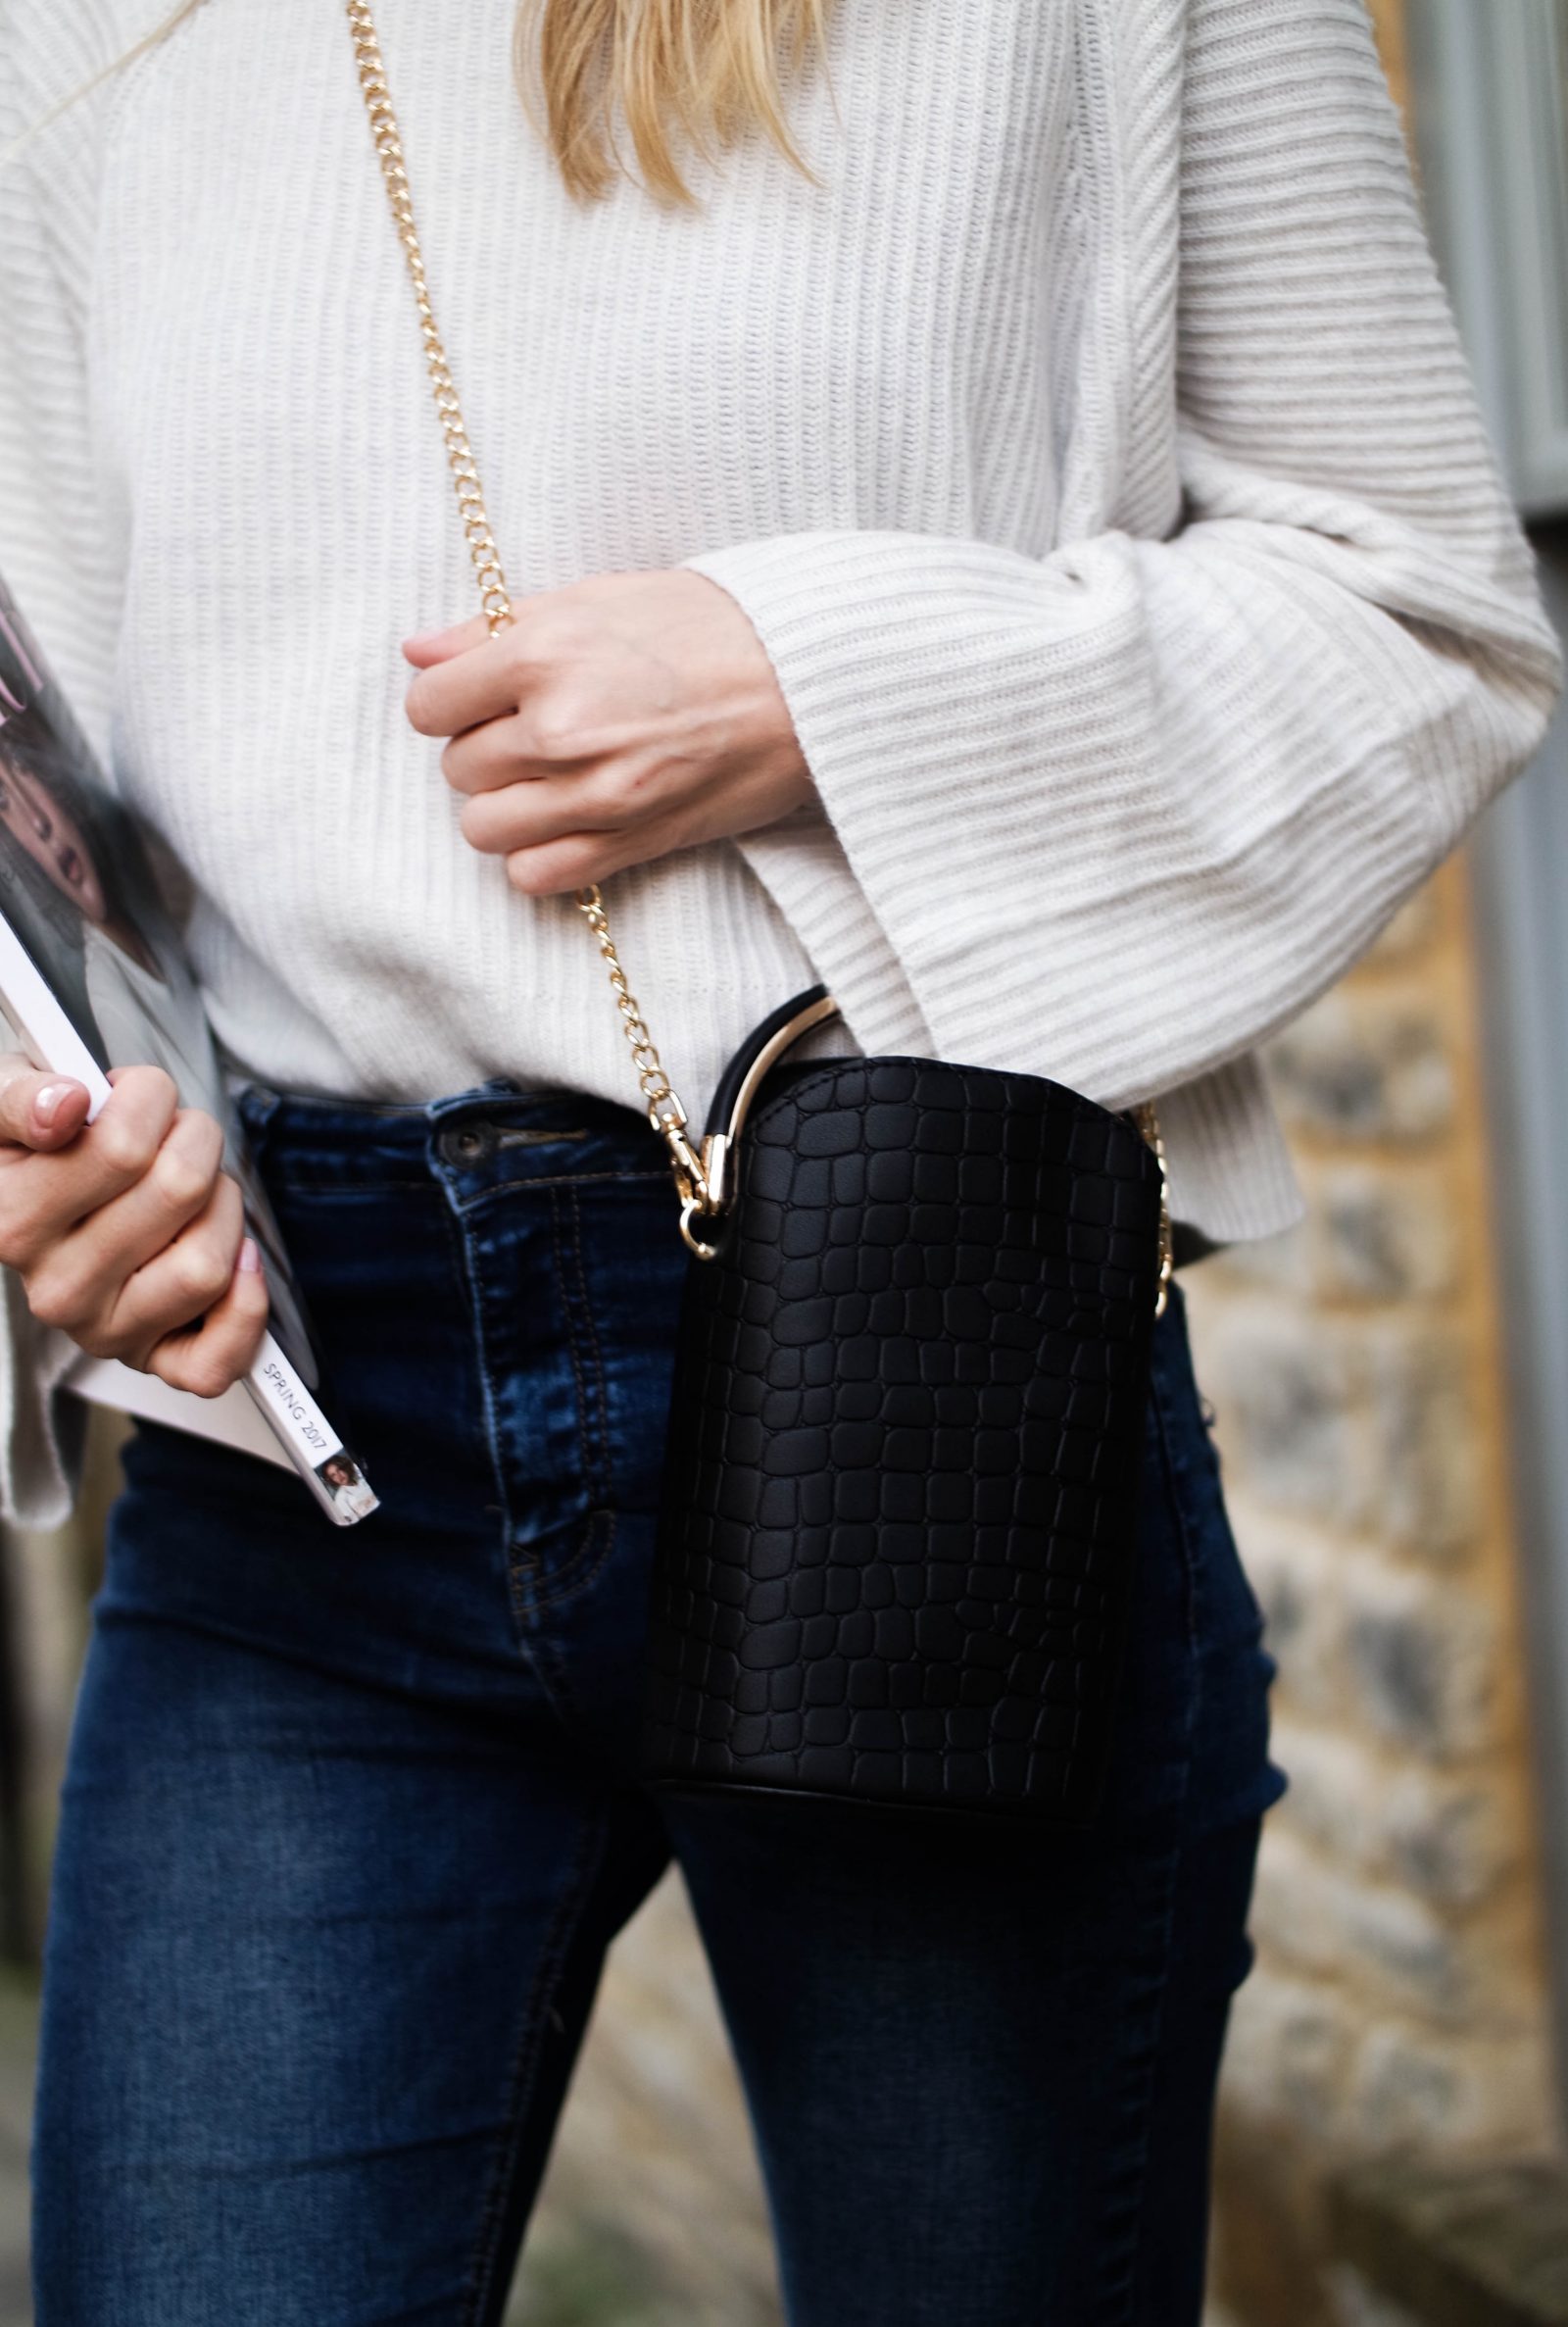 5 Reasons To Invest In Cashmere - Croc Bag 